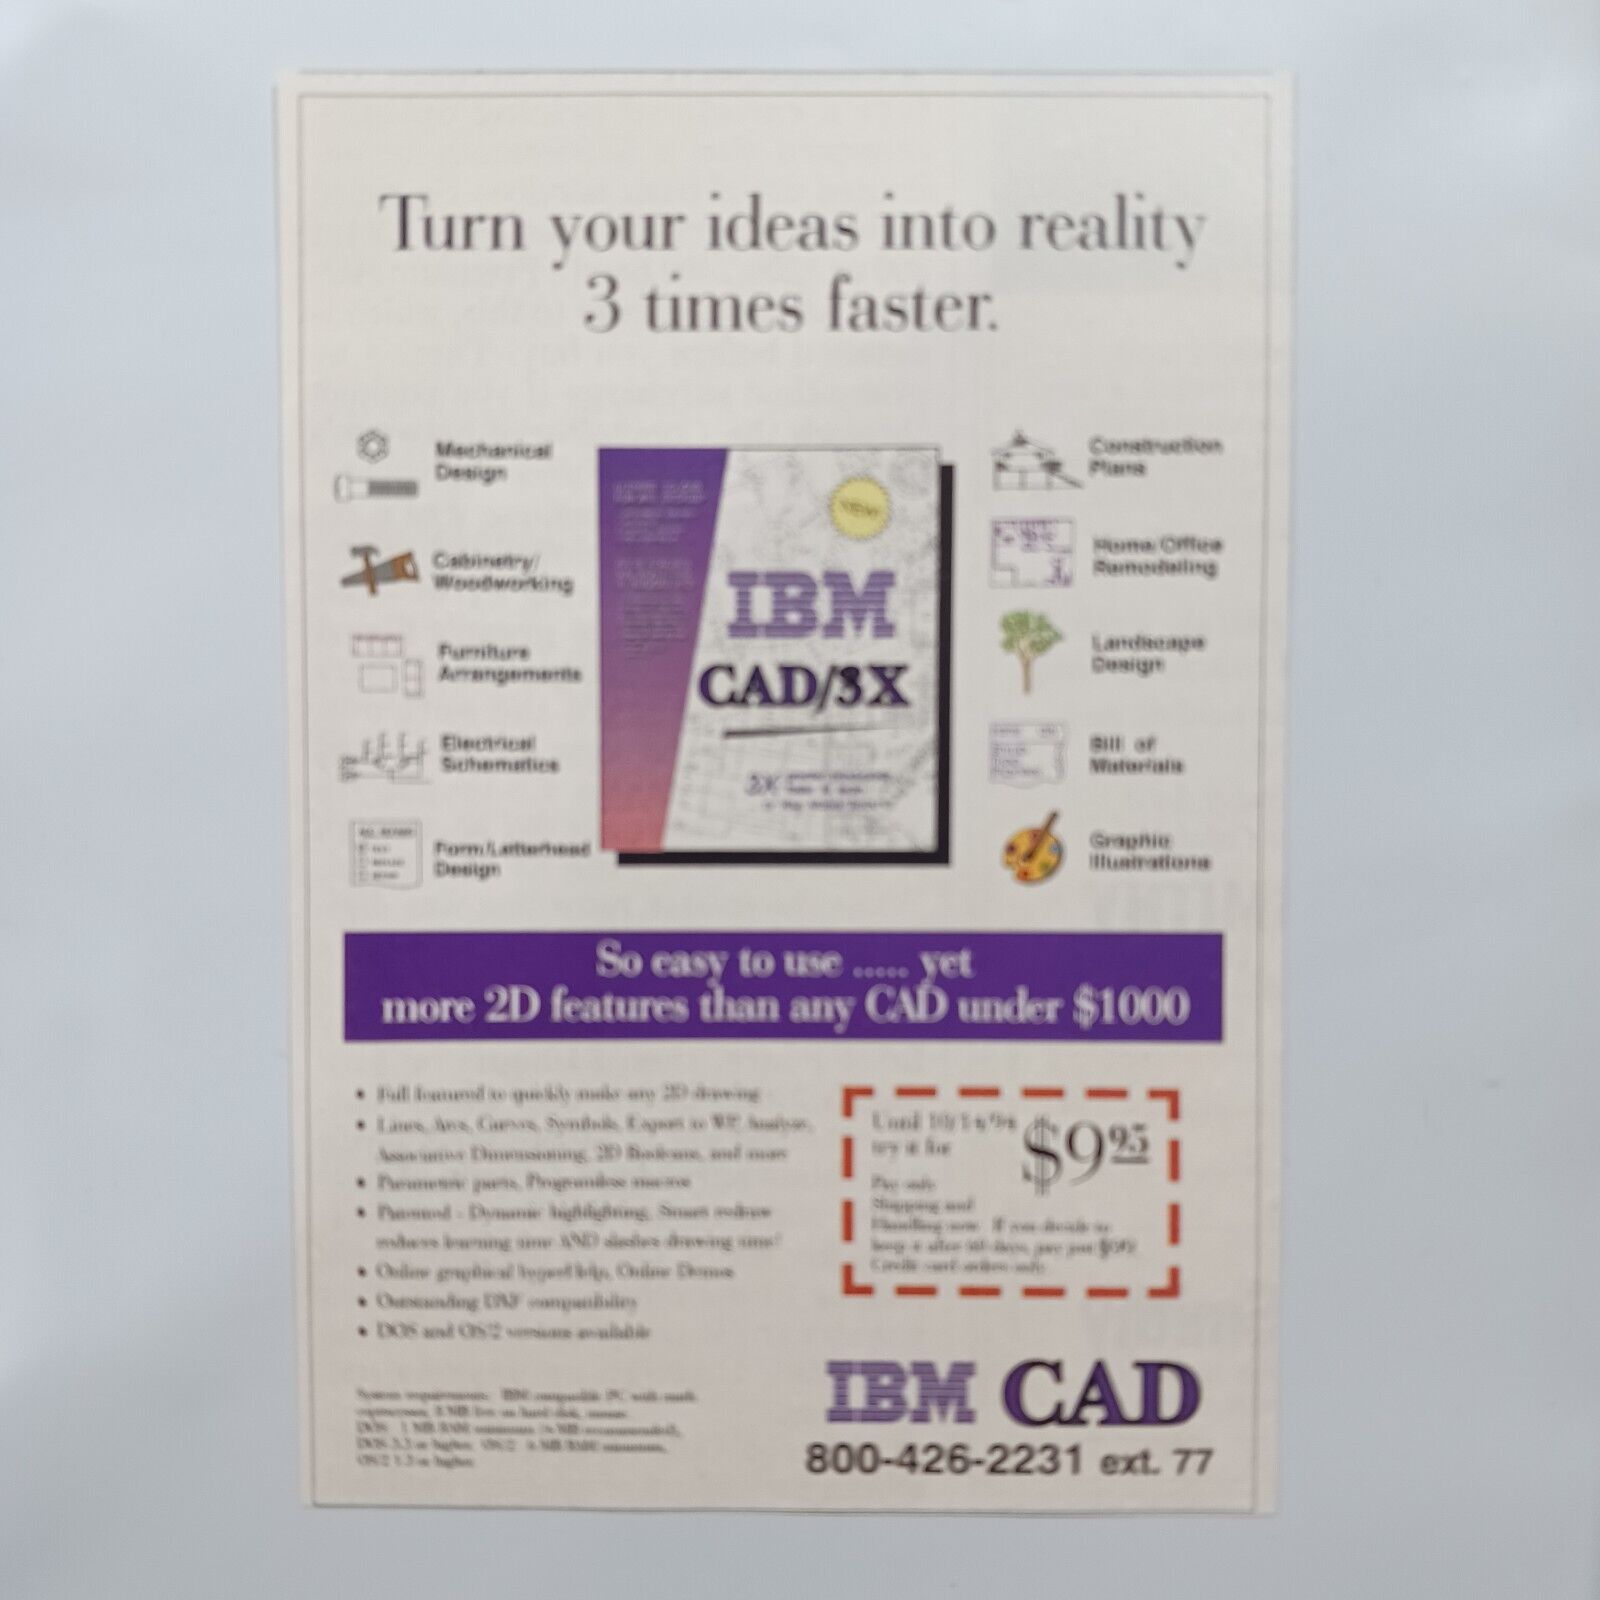 1994 VINTAGE IBM CAD TURN YOUR IDEAS INTO REALITY 3 TIMES FASTER PRINT AD